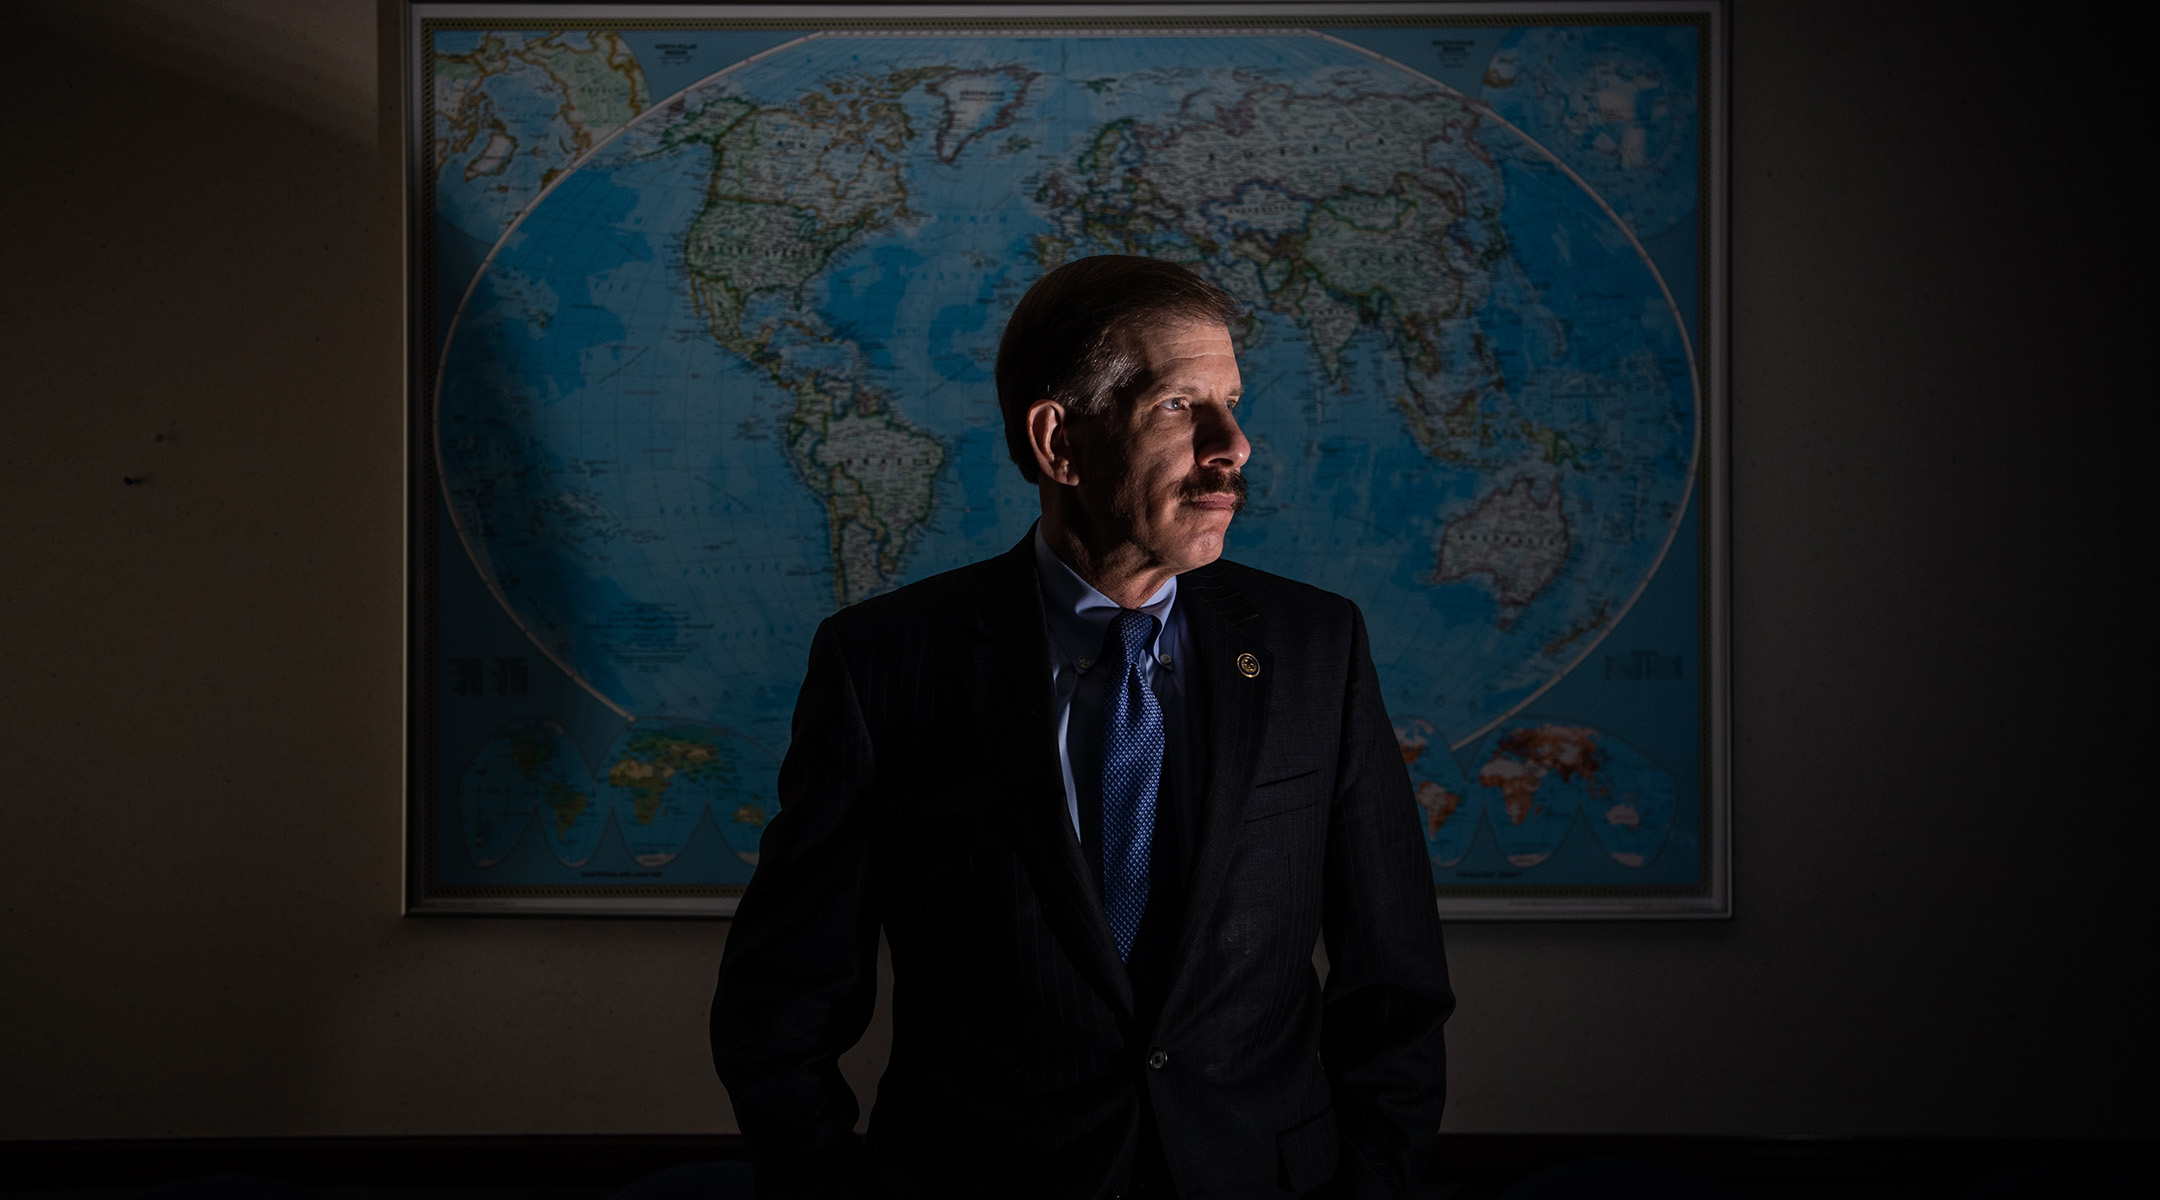 Eli Rosenbaum, the new head of the War Crimes Accountability Team at the U.S. Department of Justice, photographed in his office in Washington, D.C., Aug. 24, 2018. (Salwan Georges/The Washington Post via Getty Images)